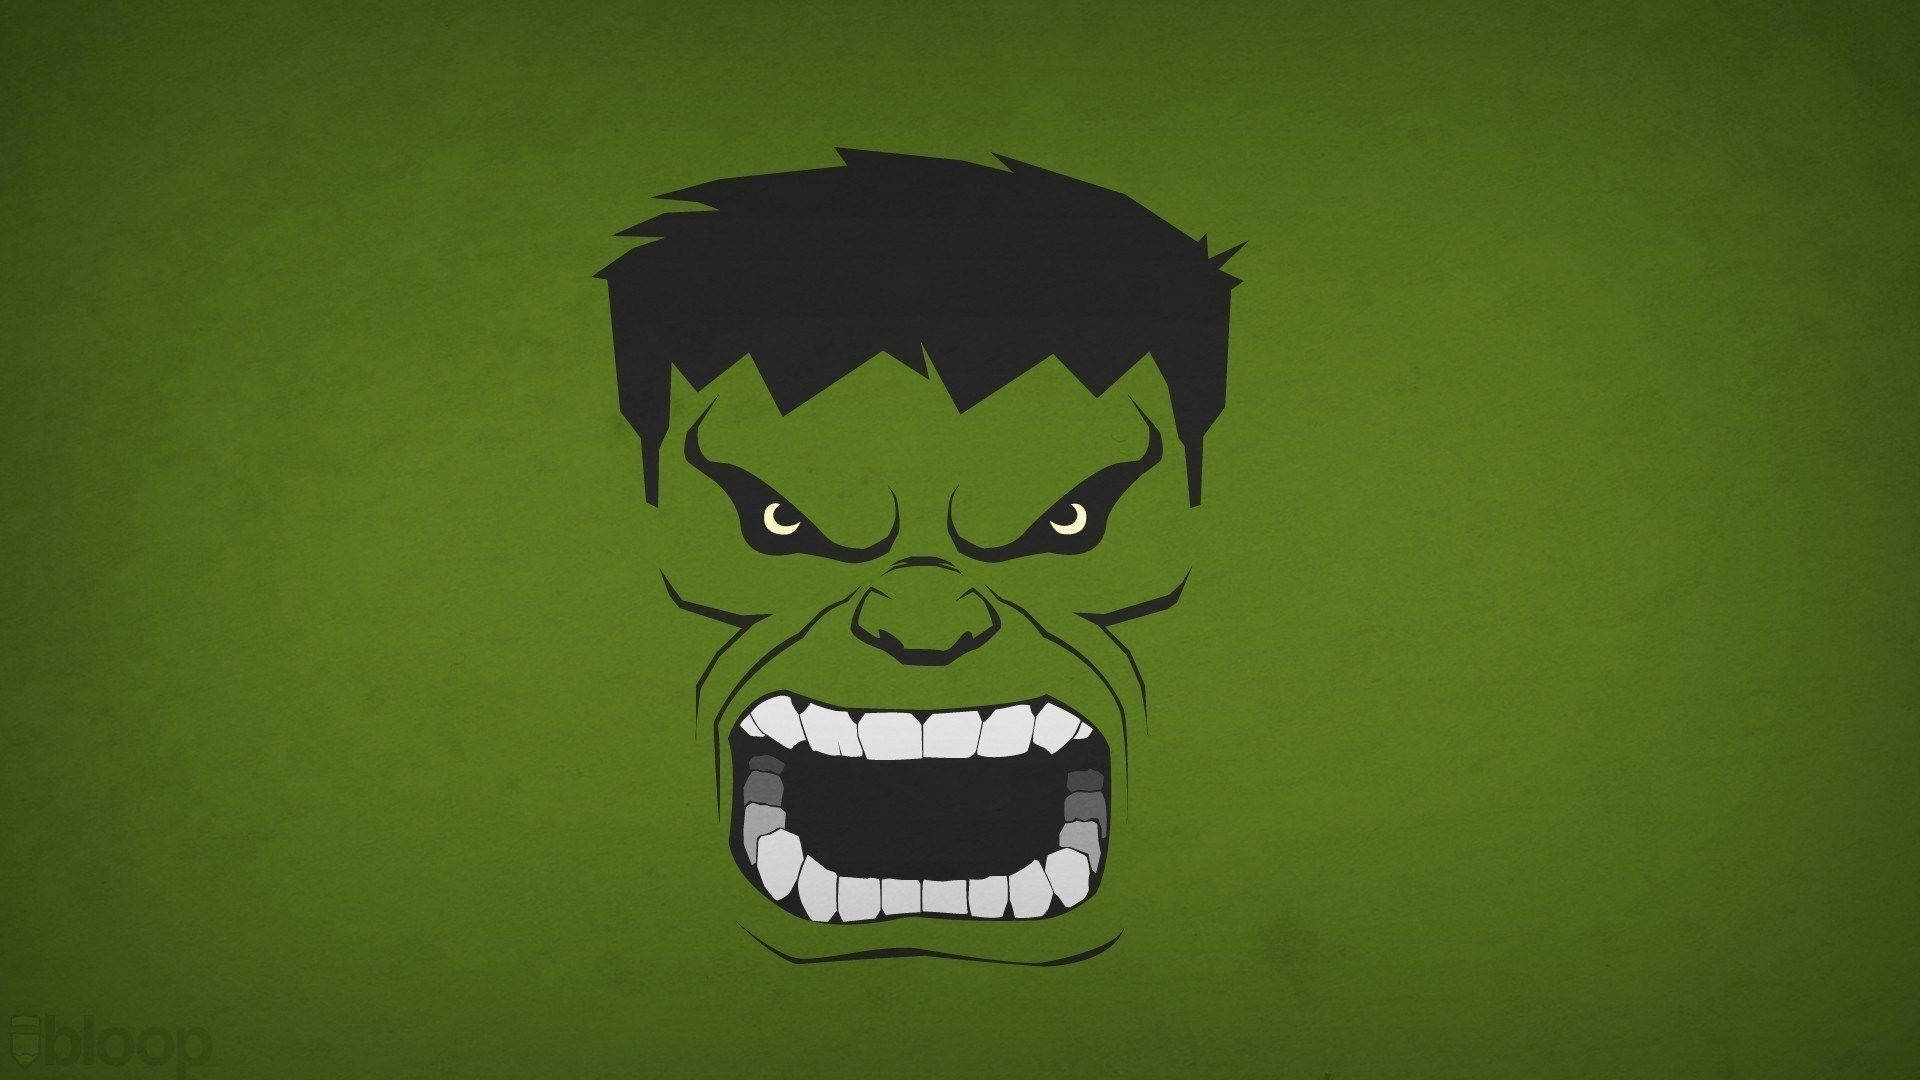 Incredible Hulk Wallpapers (78+ pictures)